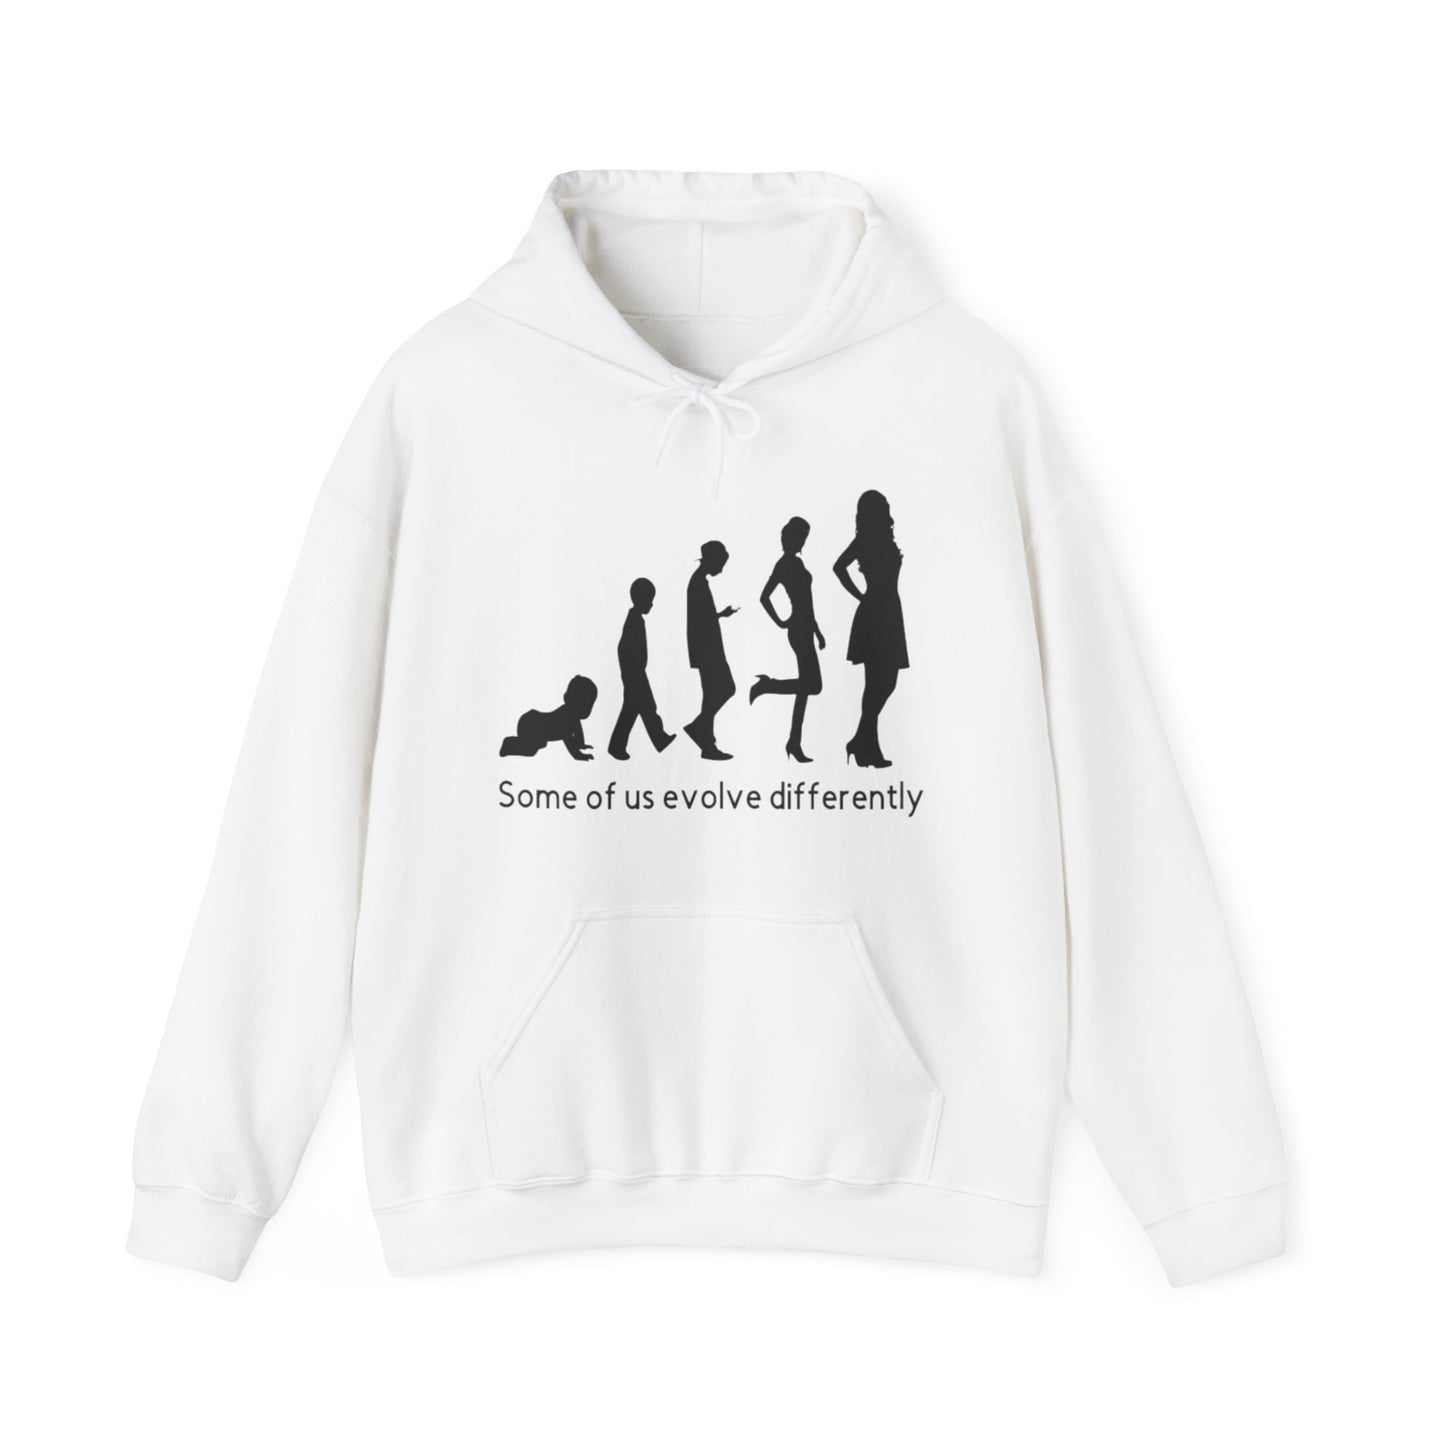 Some of Us Evolve Differently Hooded Sweatshirt, Hoodie, LGBTQ, Transgender, Trans MTF, Transsexual, LGBT, Queer, Coming Out